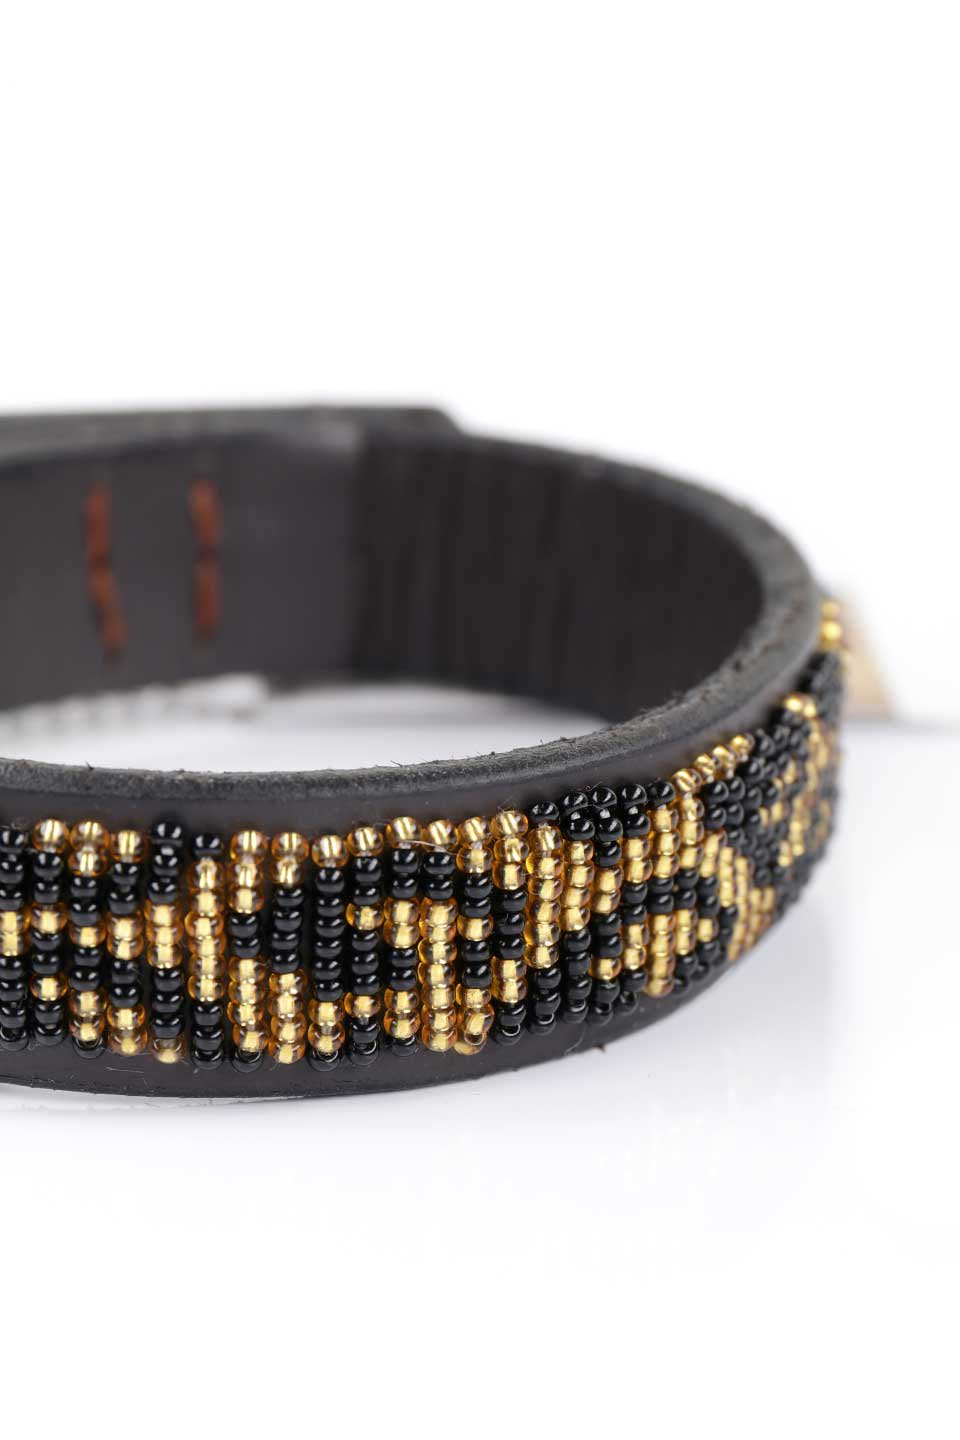 Leopard Beaded Dog Collar 10" レオパード・ビーズドッグカラー / by THE KENYAN COLLECTION